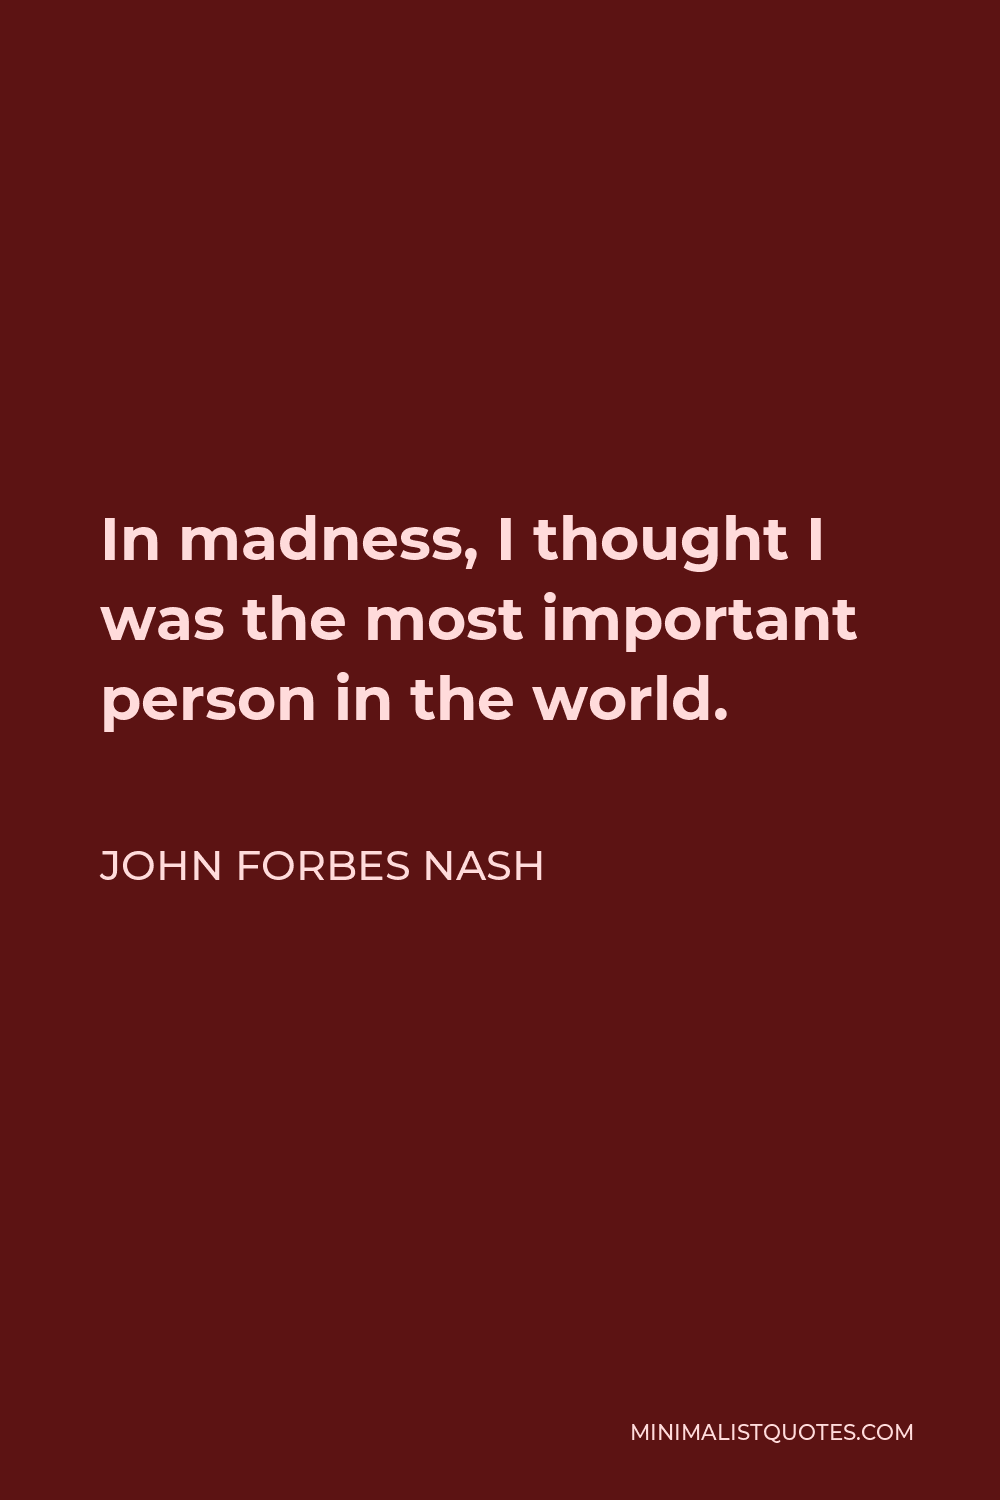 John Forbes Nash Quote - In madness, I thought I was the most important person in the world.